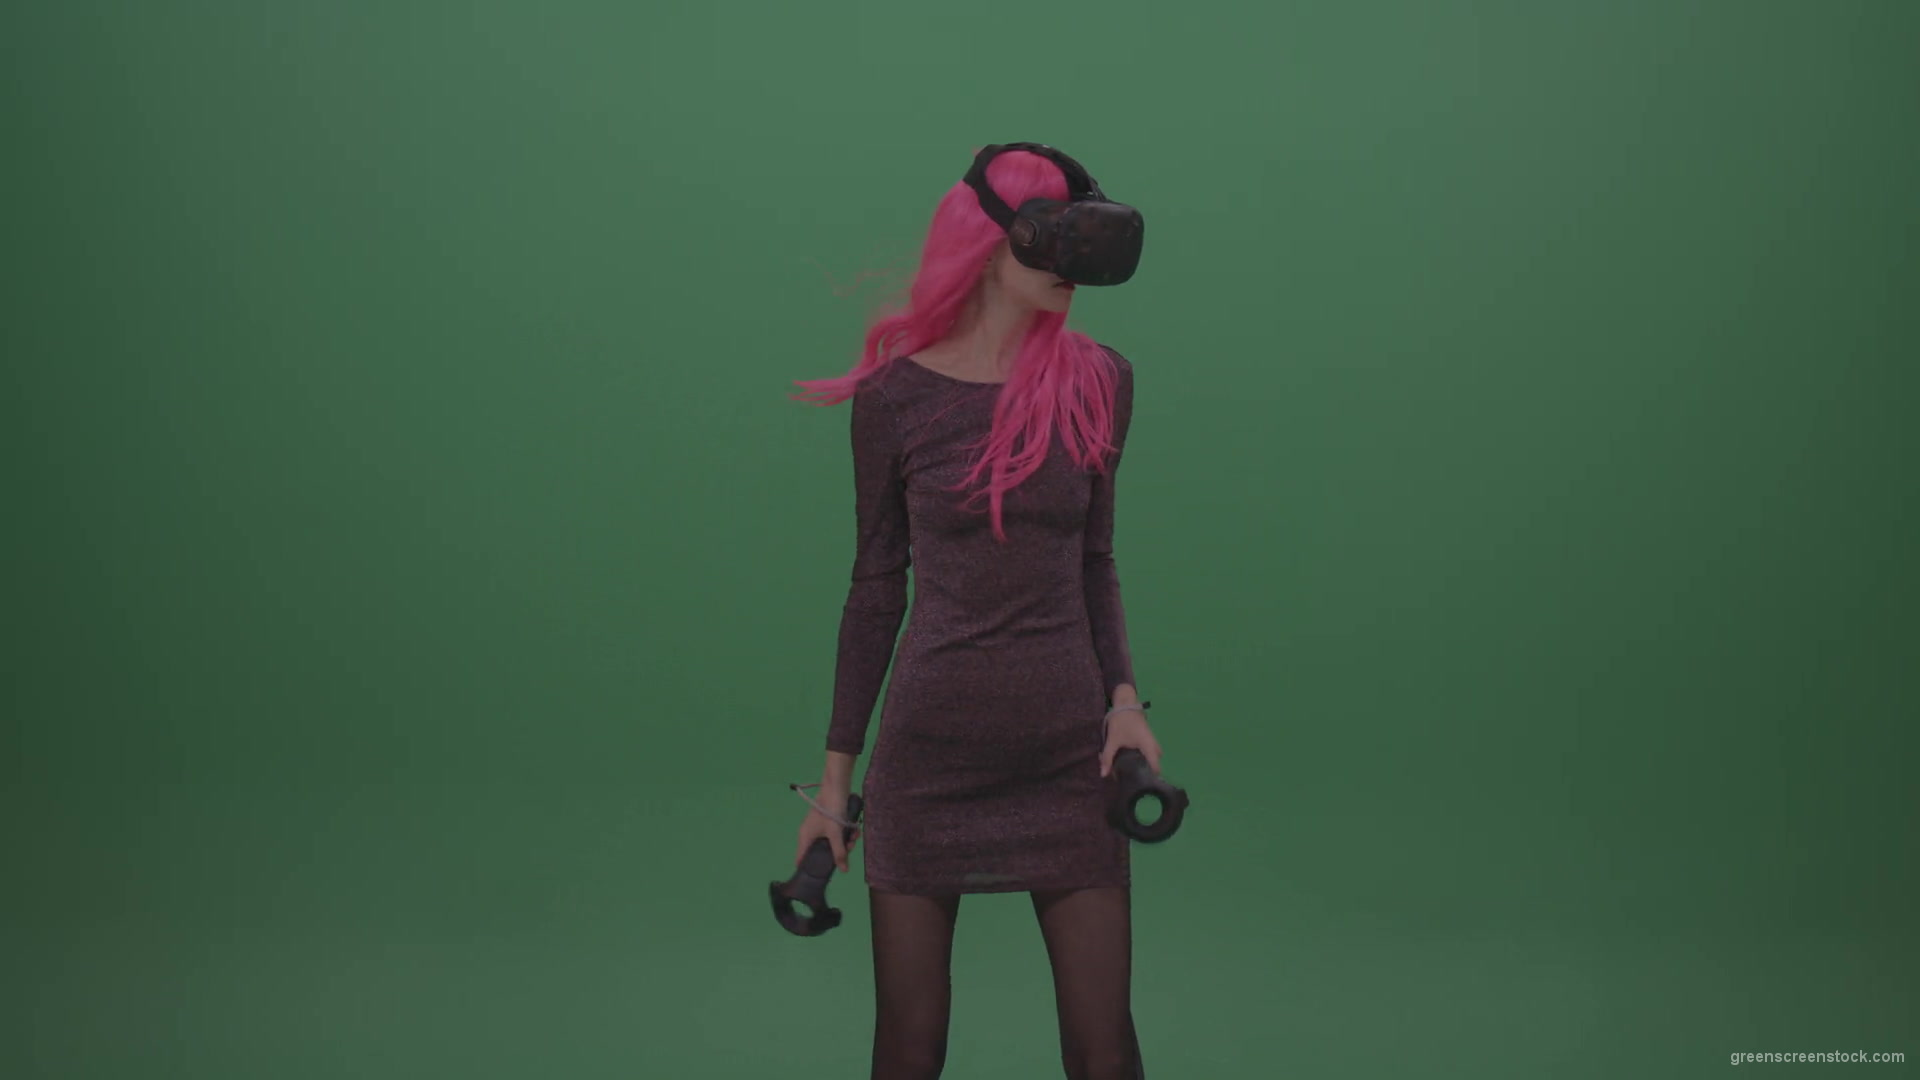 Pink_Hair_Young_Japanese_Anime_Rock_Girl_Shooting_Enemies_In_Virtual_Reality_Game_Heavy_Wind_Weather_Green_Screen_Wall_Background-1920_005 Green Screen Stock